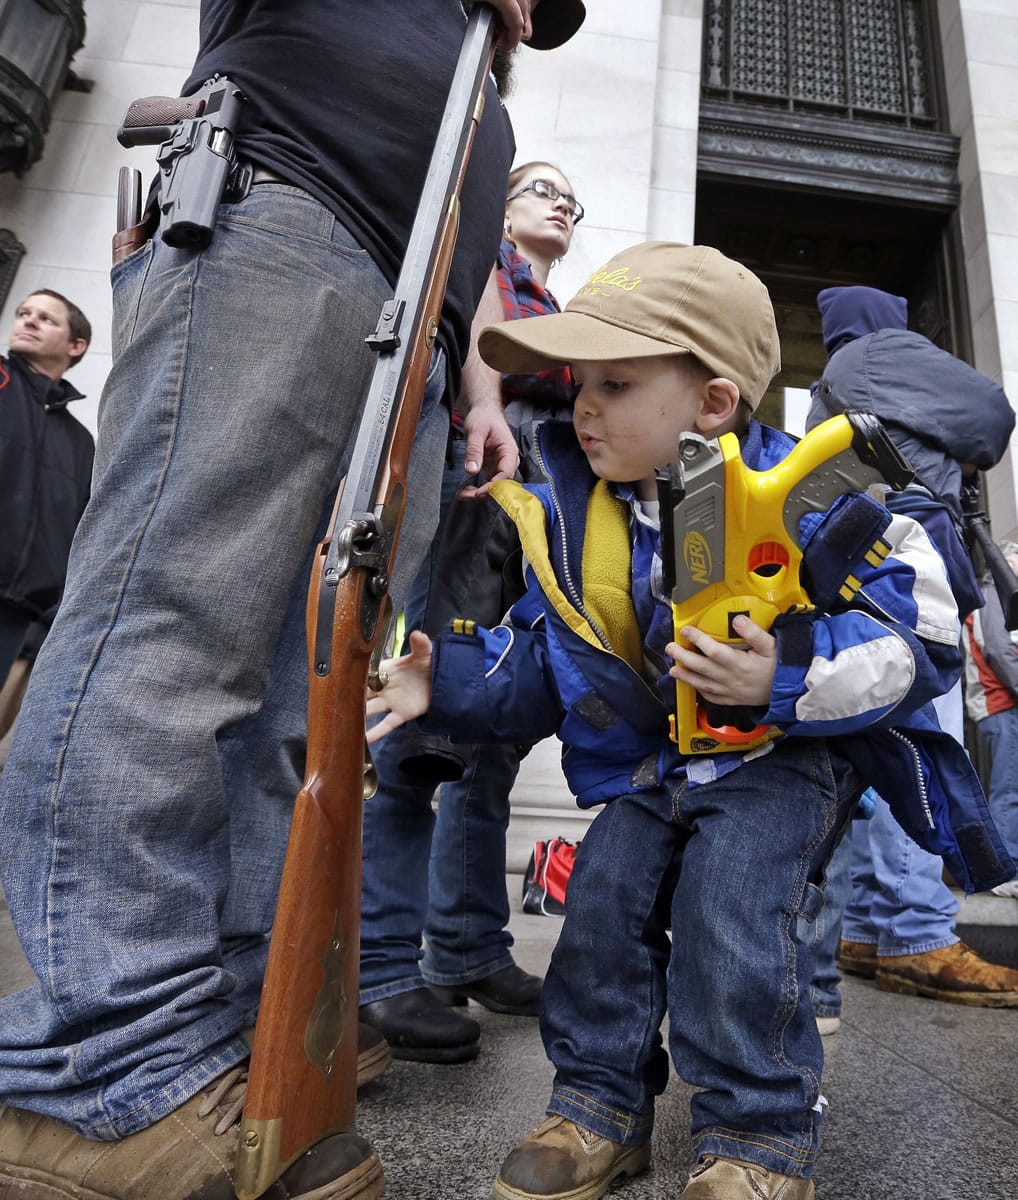 Trystan Olson, 4, of Spokane holds a toy gun as he reaches toward the trigger of the rifle of his father, Erik Olson, during a rally by gun-rights advocates at the state Capitol on Saturday in Olympia.